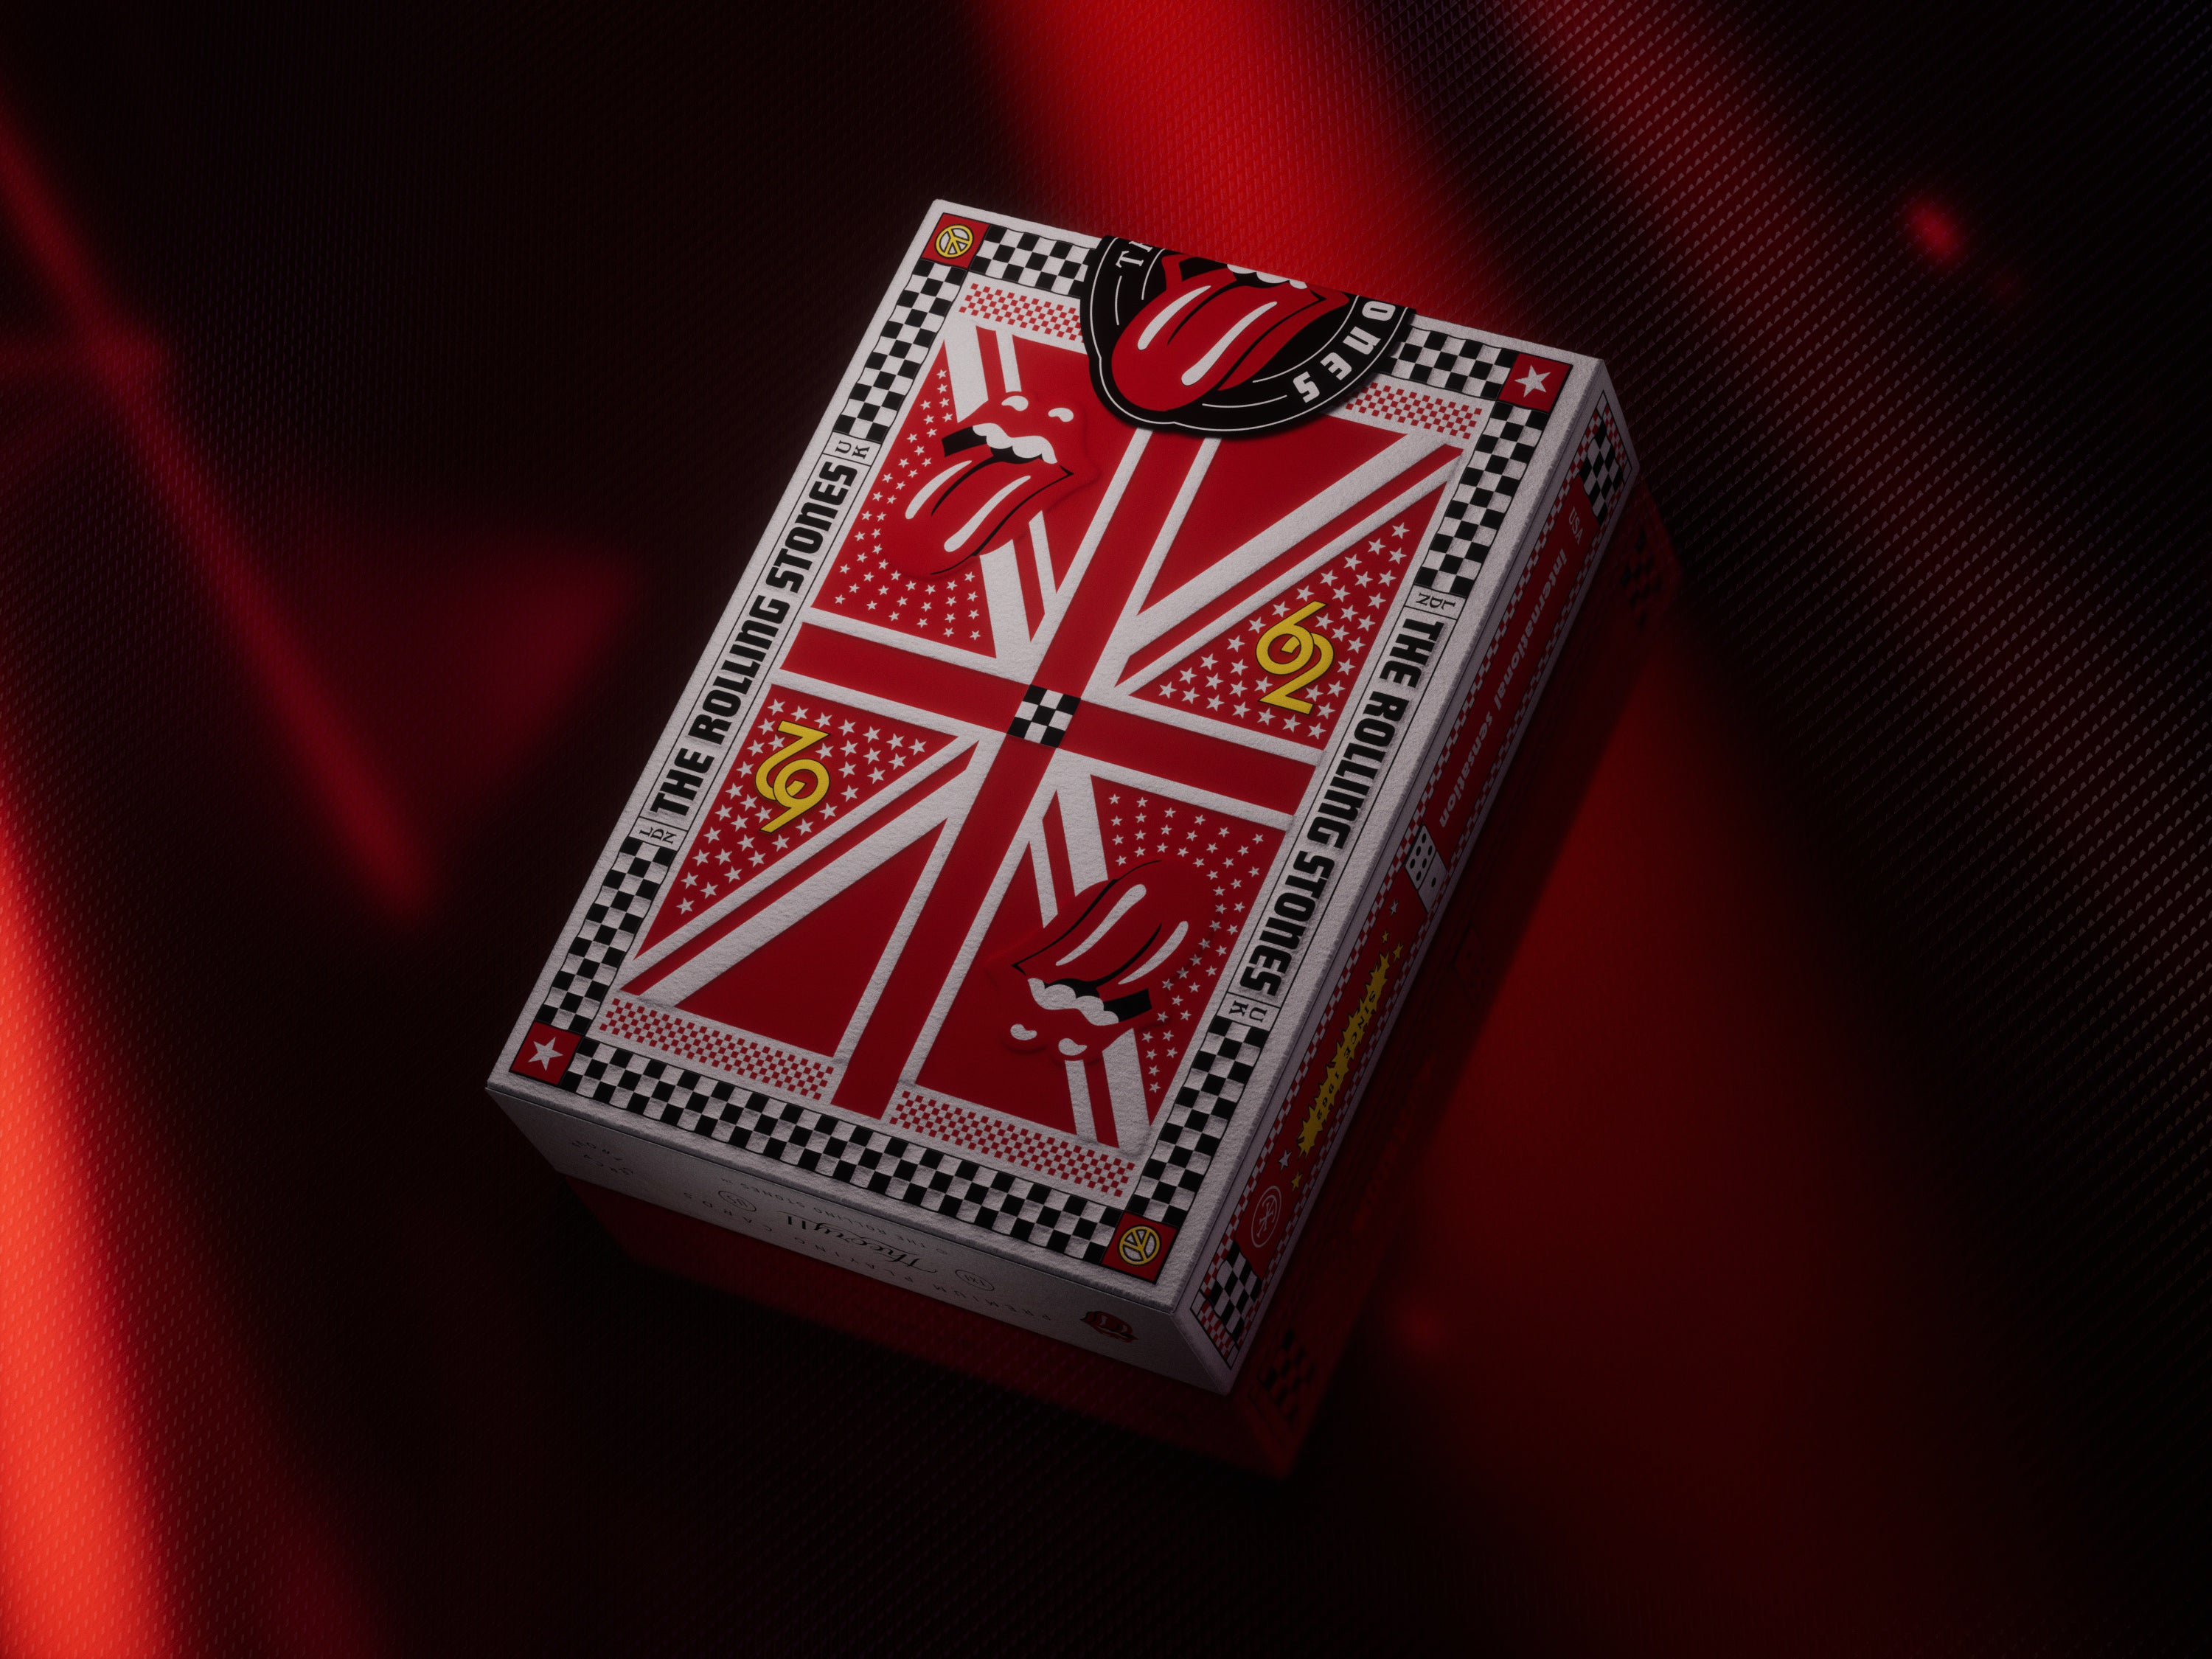 RS No. 9 Carnaby - The Rolling Stones x Theory11 Playing Cards